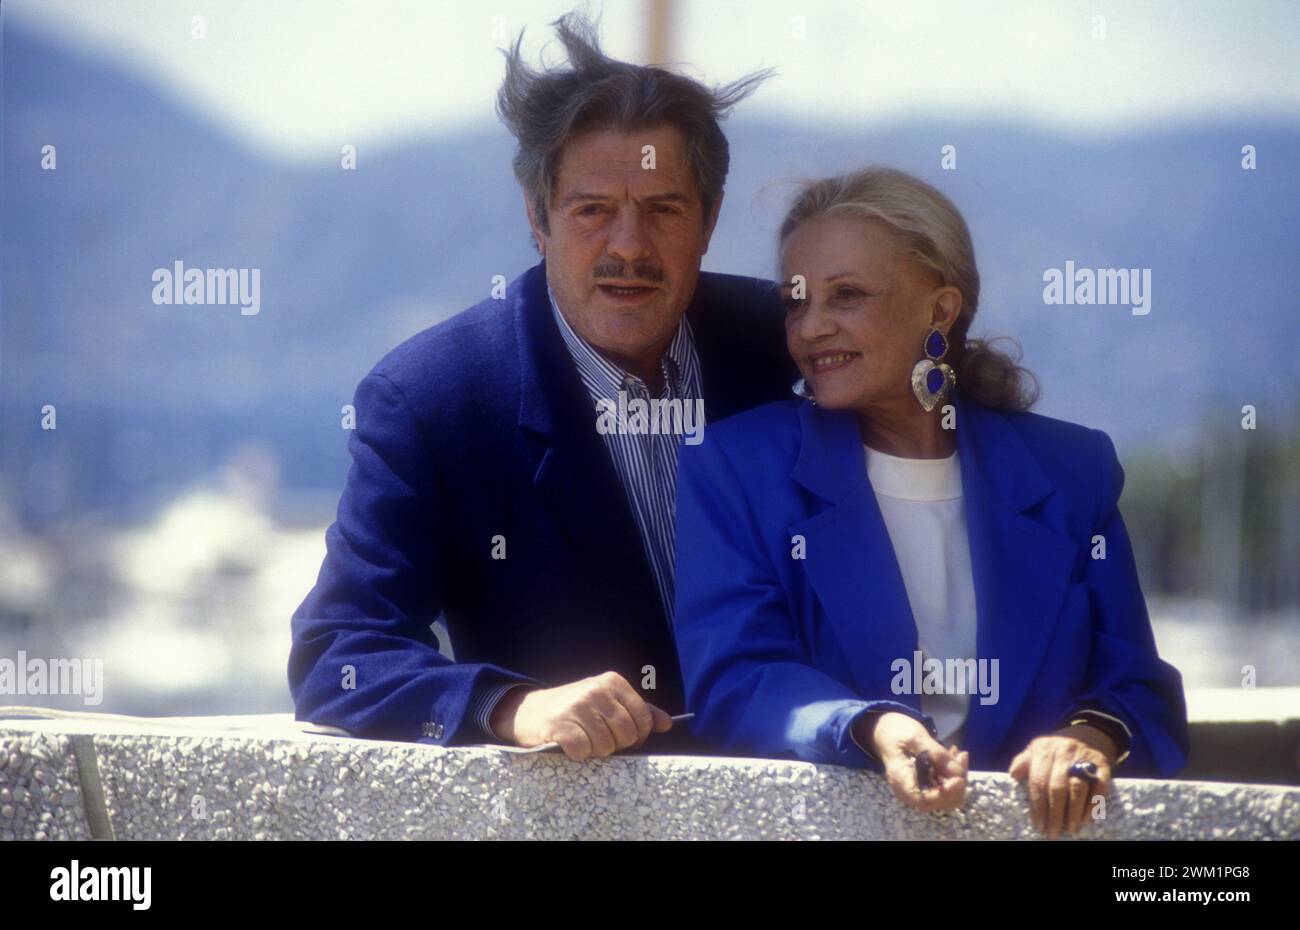 MME4703482 Comedians Marcello Mastroianni and Jeanne Moreau at the Cannes Film Festival in 1991.; (add.info.: Comedians Marcello Mastroianni and Jeanne Moreau at the Cannes Film Festival in 1991.); © Marcello Mencarini. All rights reserved 2023. Stock Photo